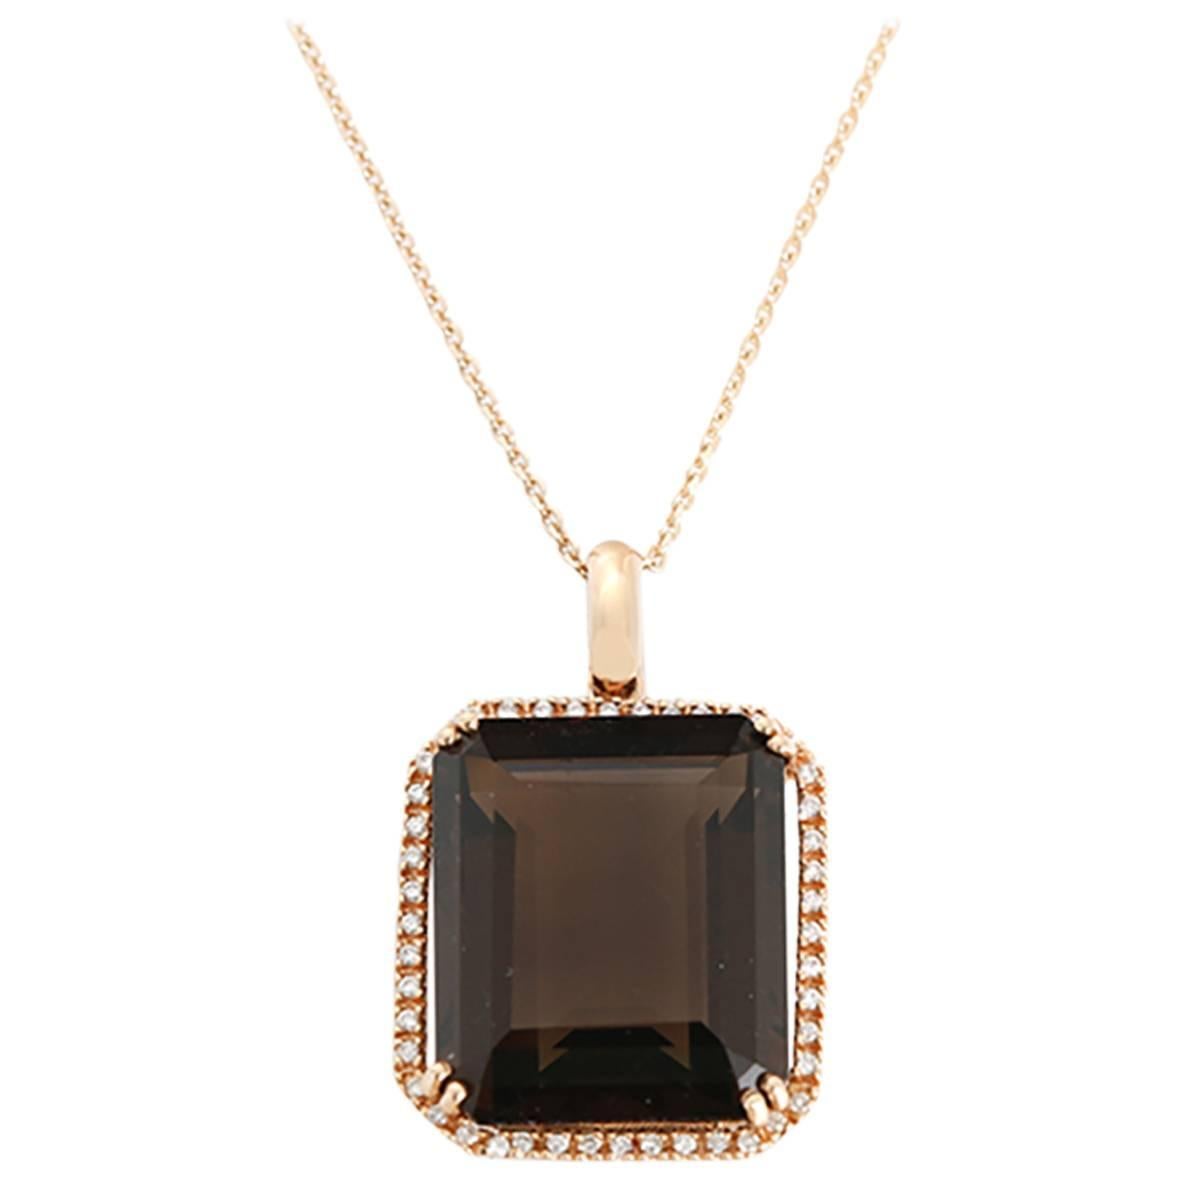 Stunning Emerald Cut Smoky Quartz, Diamond, and Rose Gold Pendant Necklace For Sale